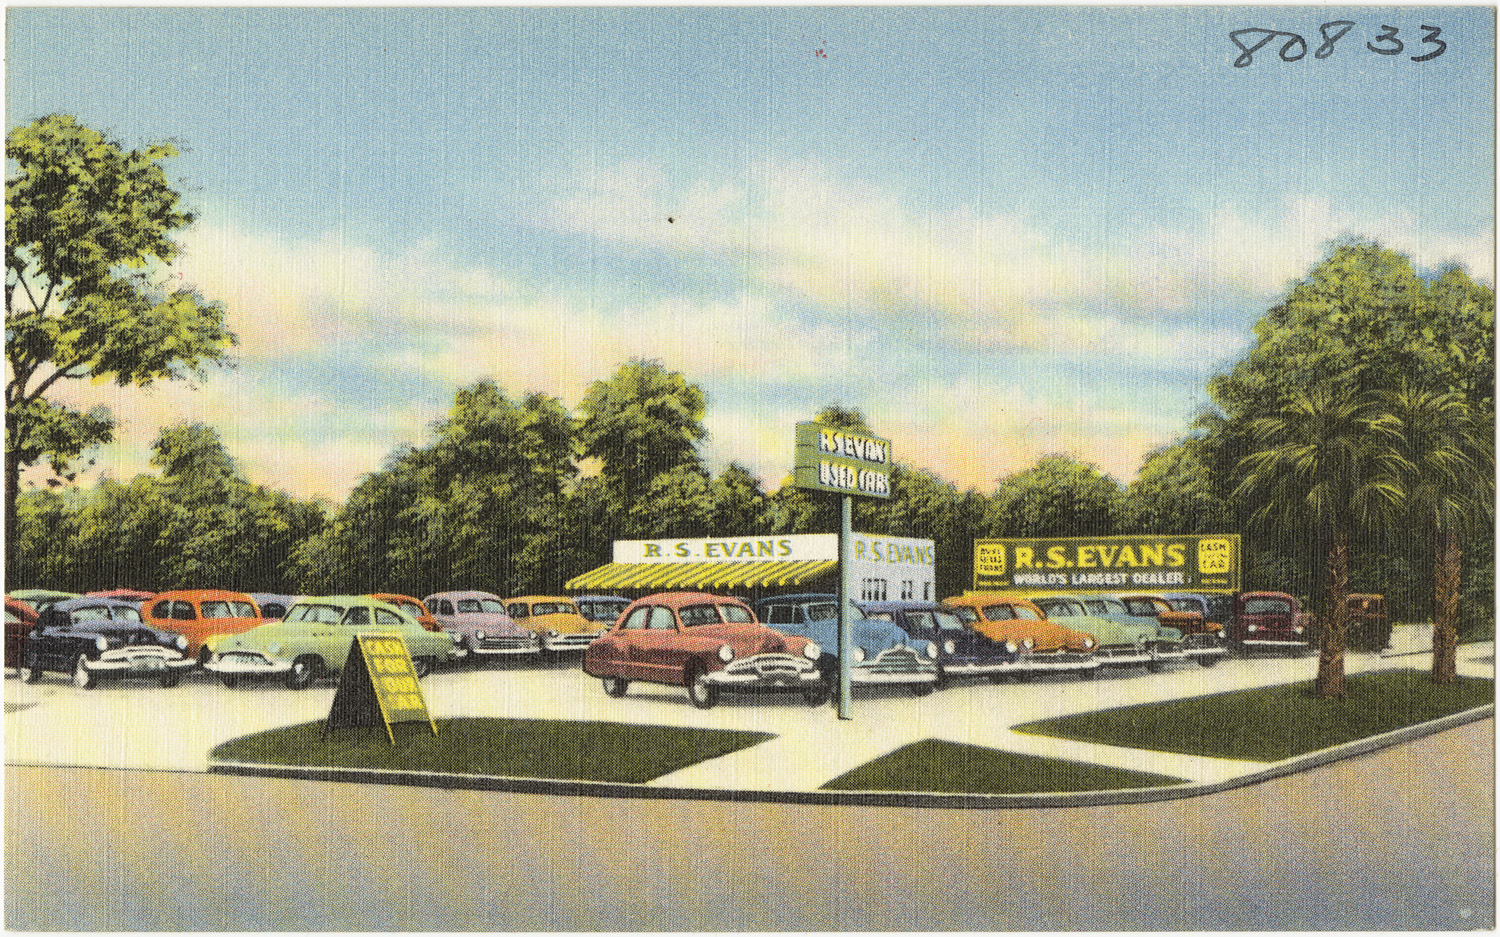 old postcard depicting cars parked at a gas station